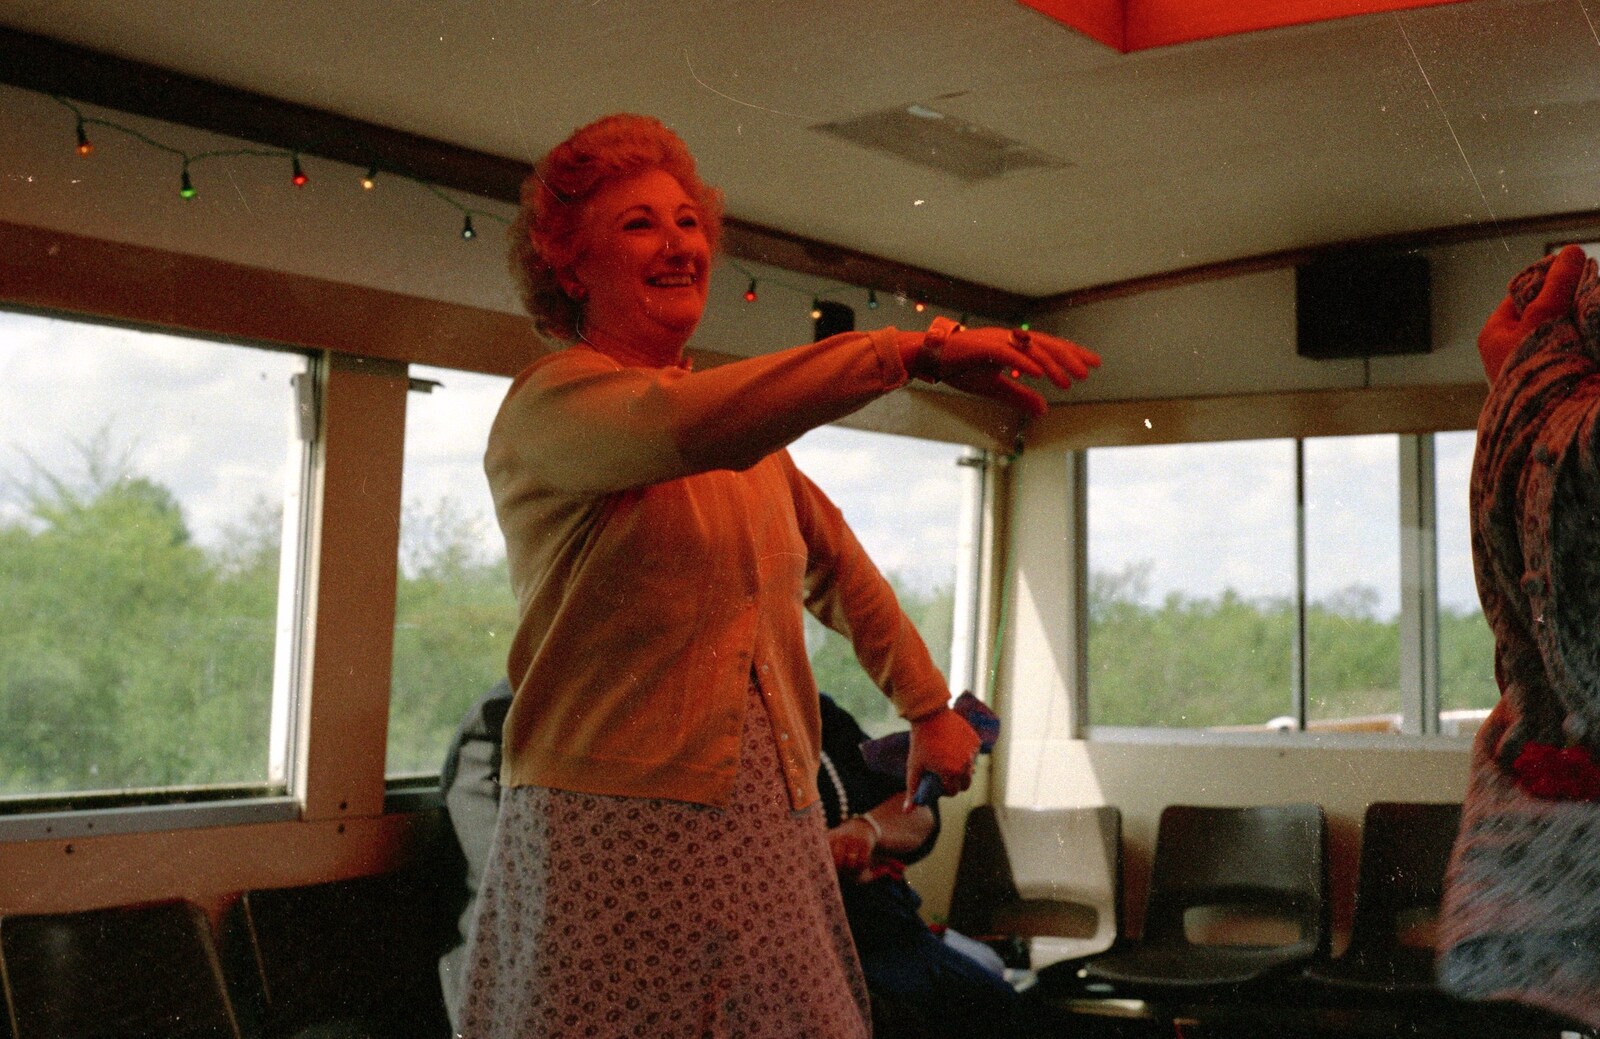 Some sort of dancing goes on from A Soman-Wherry Press Boat Trip, Horning, The Broads, Norfolk - 8th May 1988